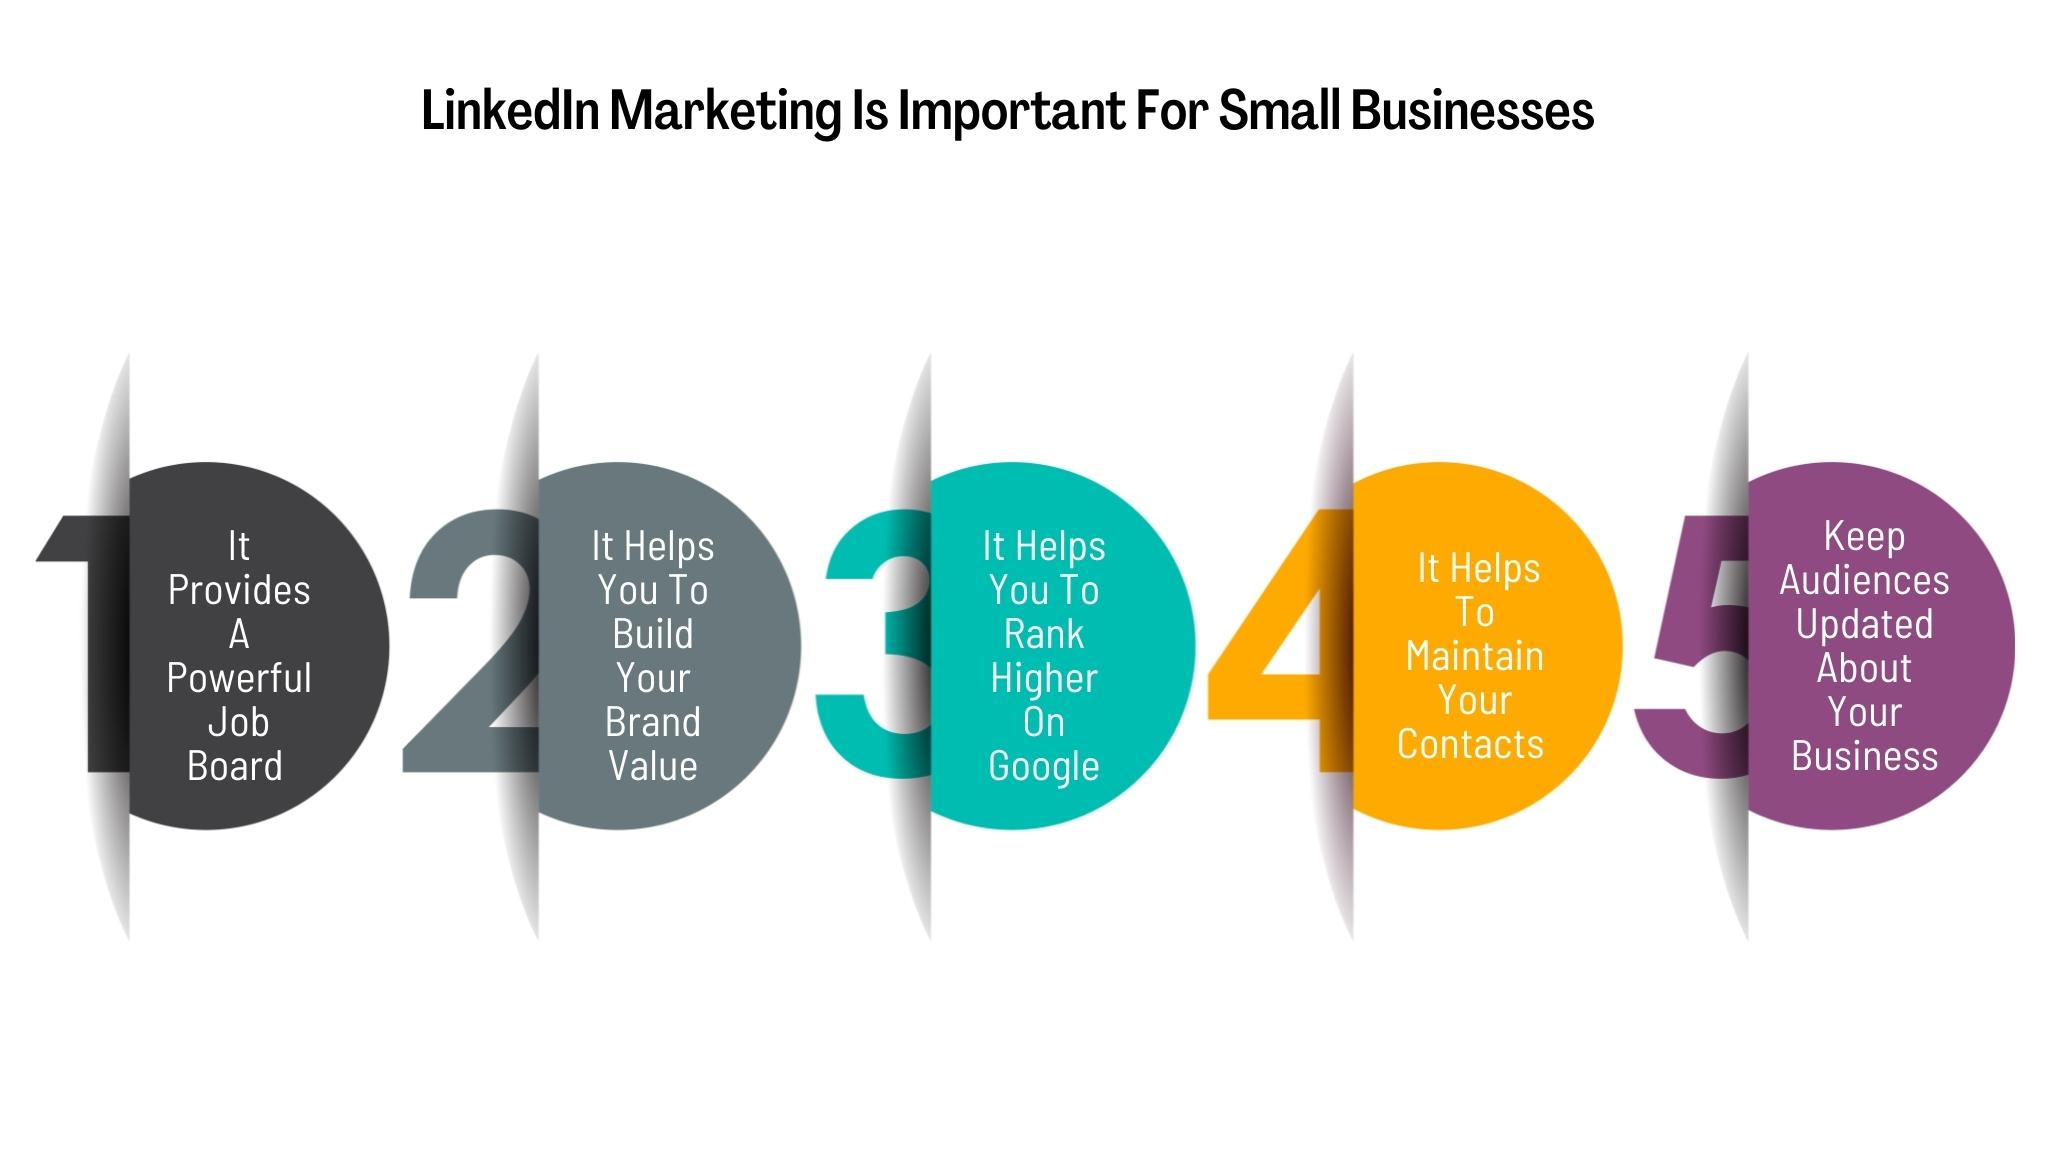 Why LinkedIn Marketing is important for small businesses?